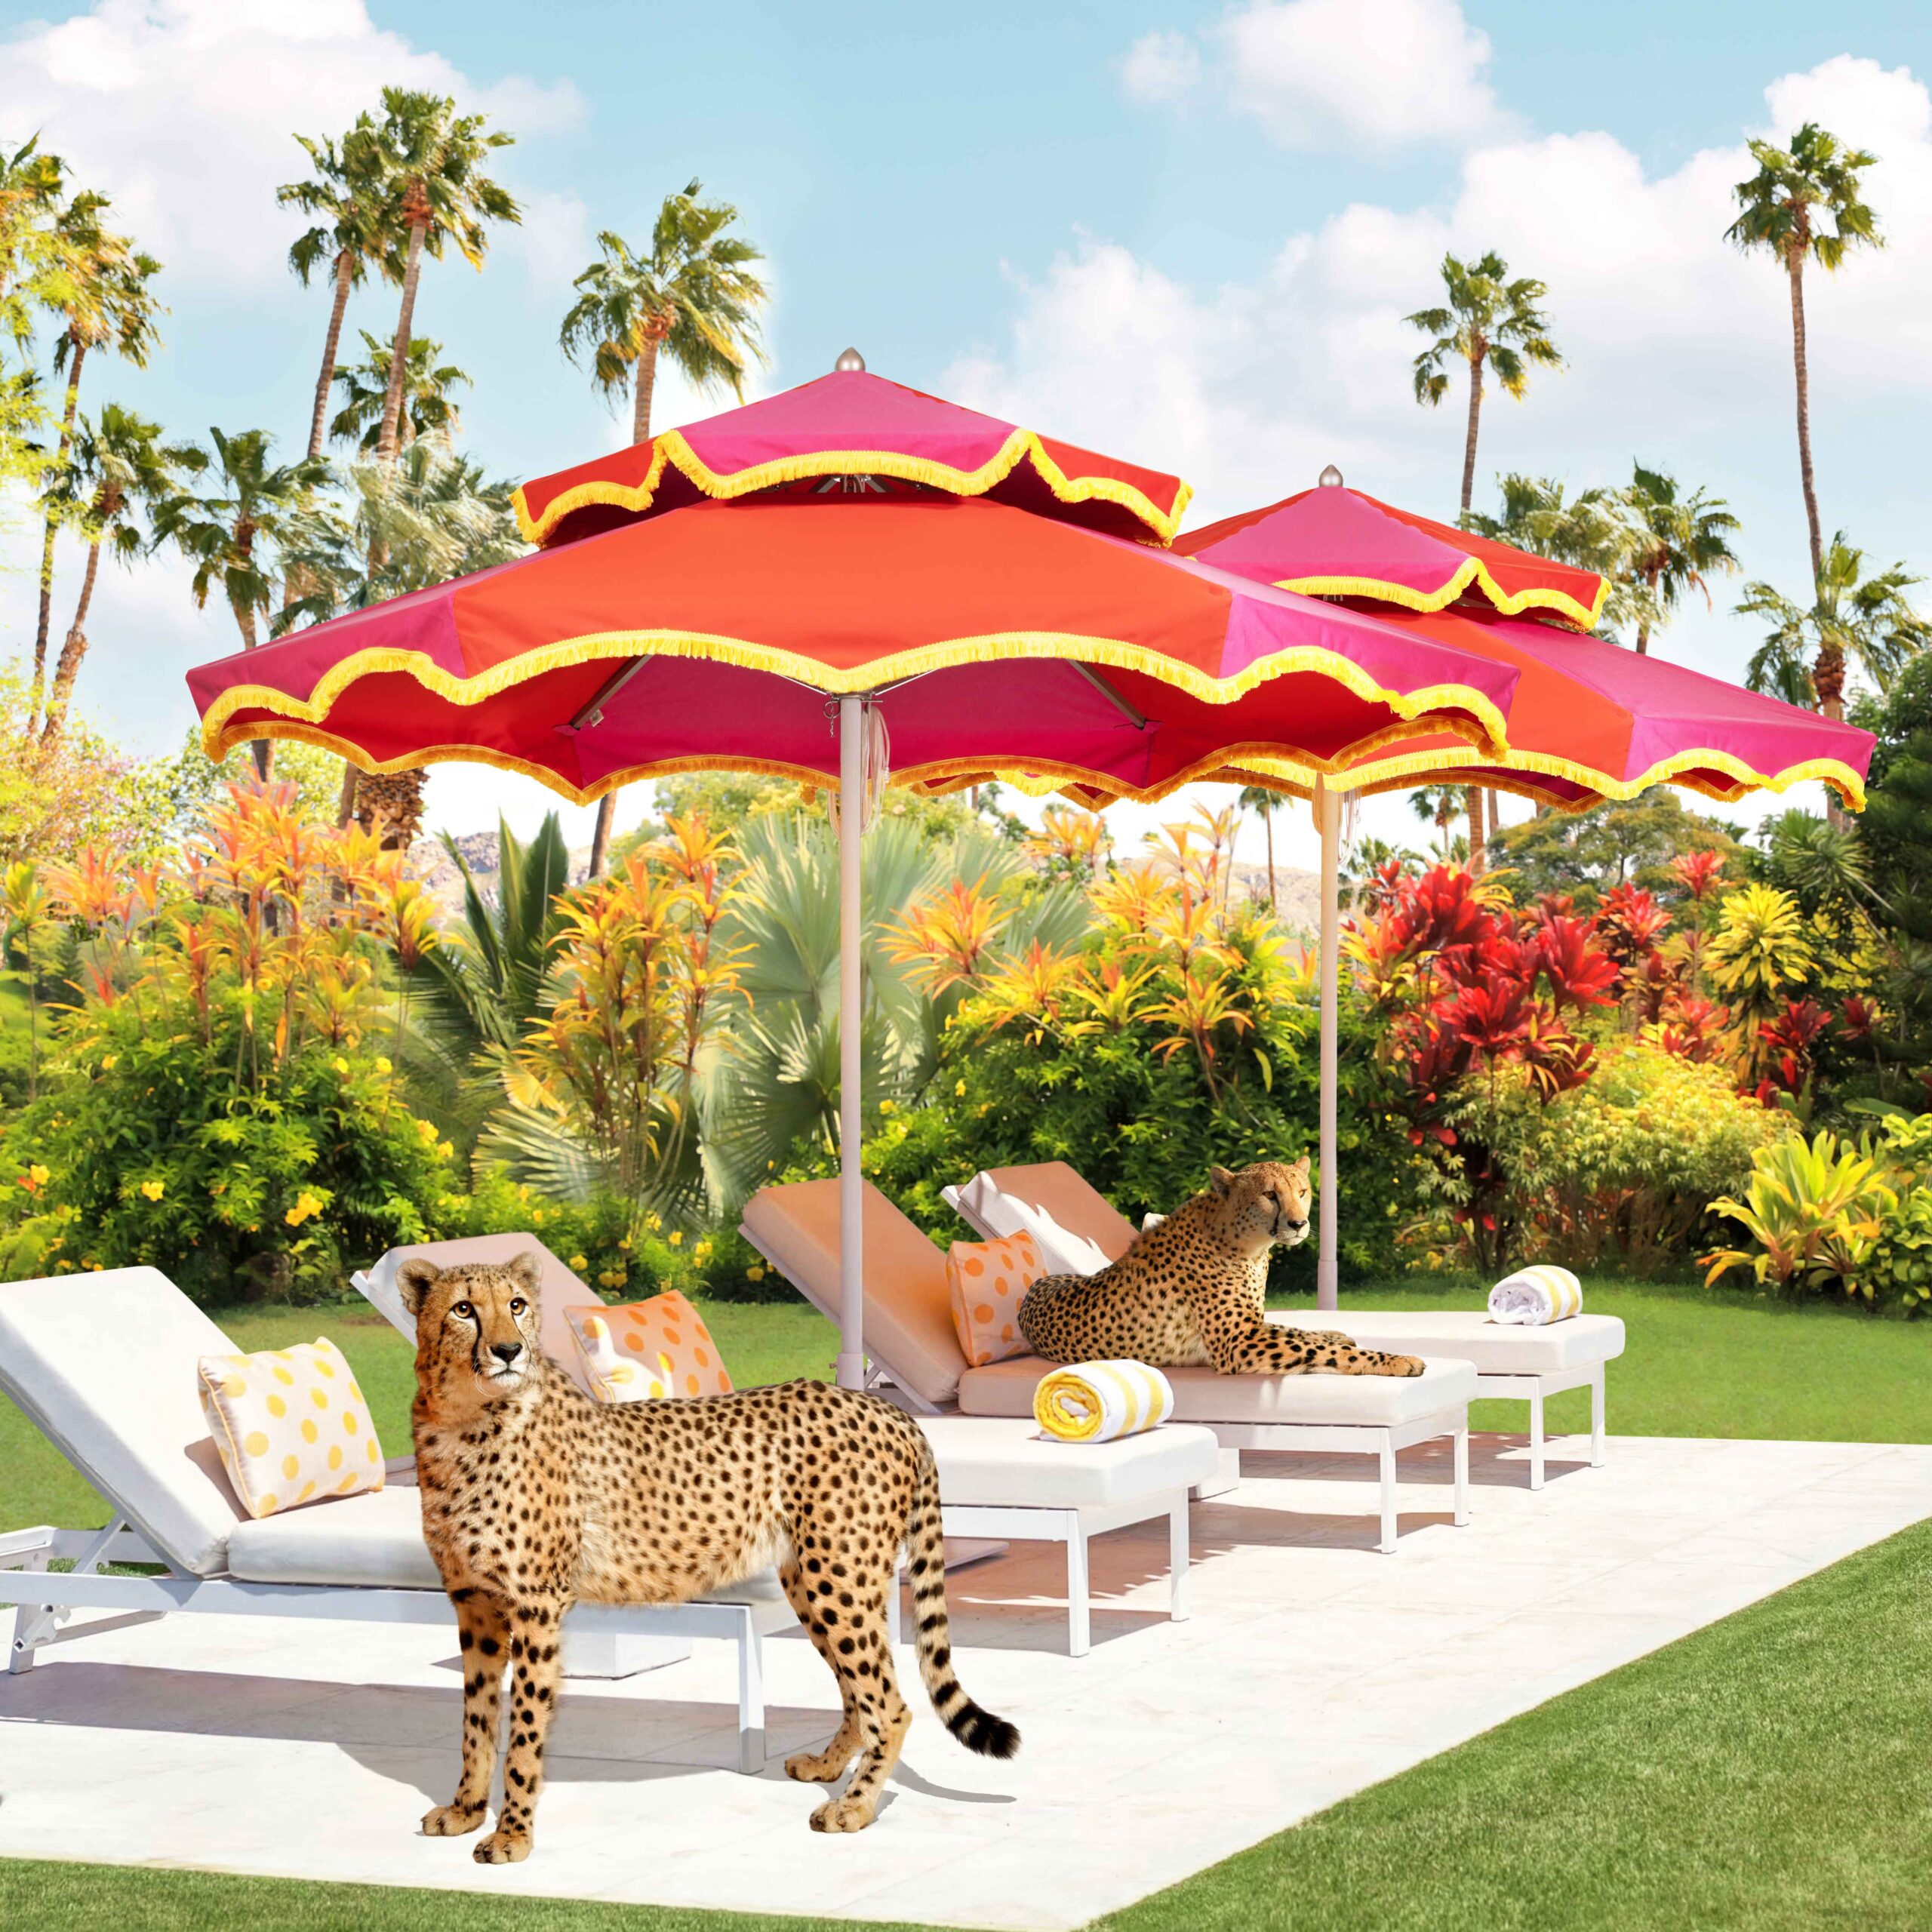 Image of umbrellas with outdoor furniture and cheetahs